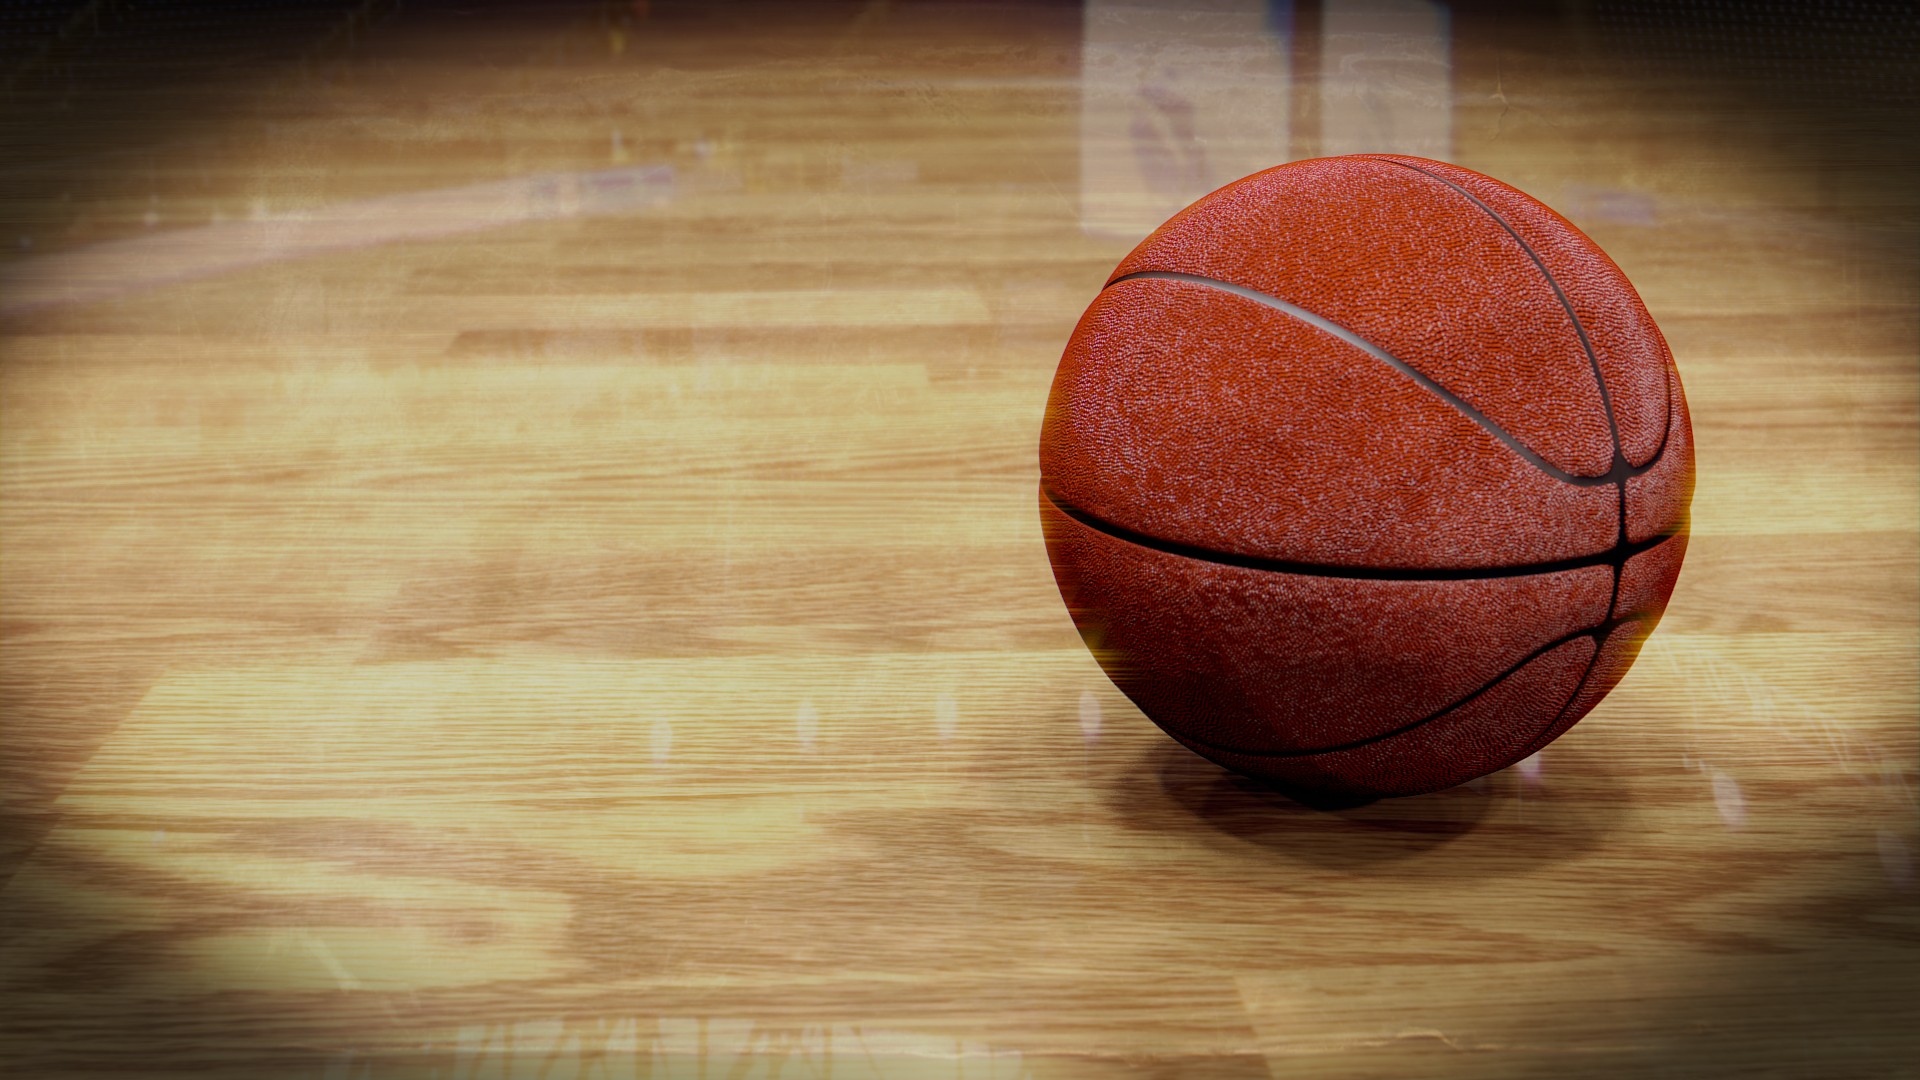 Backgrounds Basketball HD with image dimensions 1920x1080 pixel. You can make this wallpaper for your Desktop Computer Backgrounds, Windows or Mac Screensavers, iPhone Lock screen, Tablet or Android and another Mobile Phone device